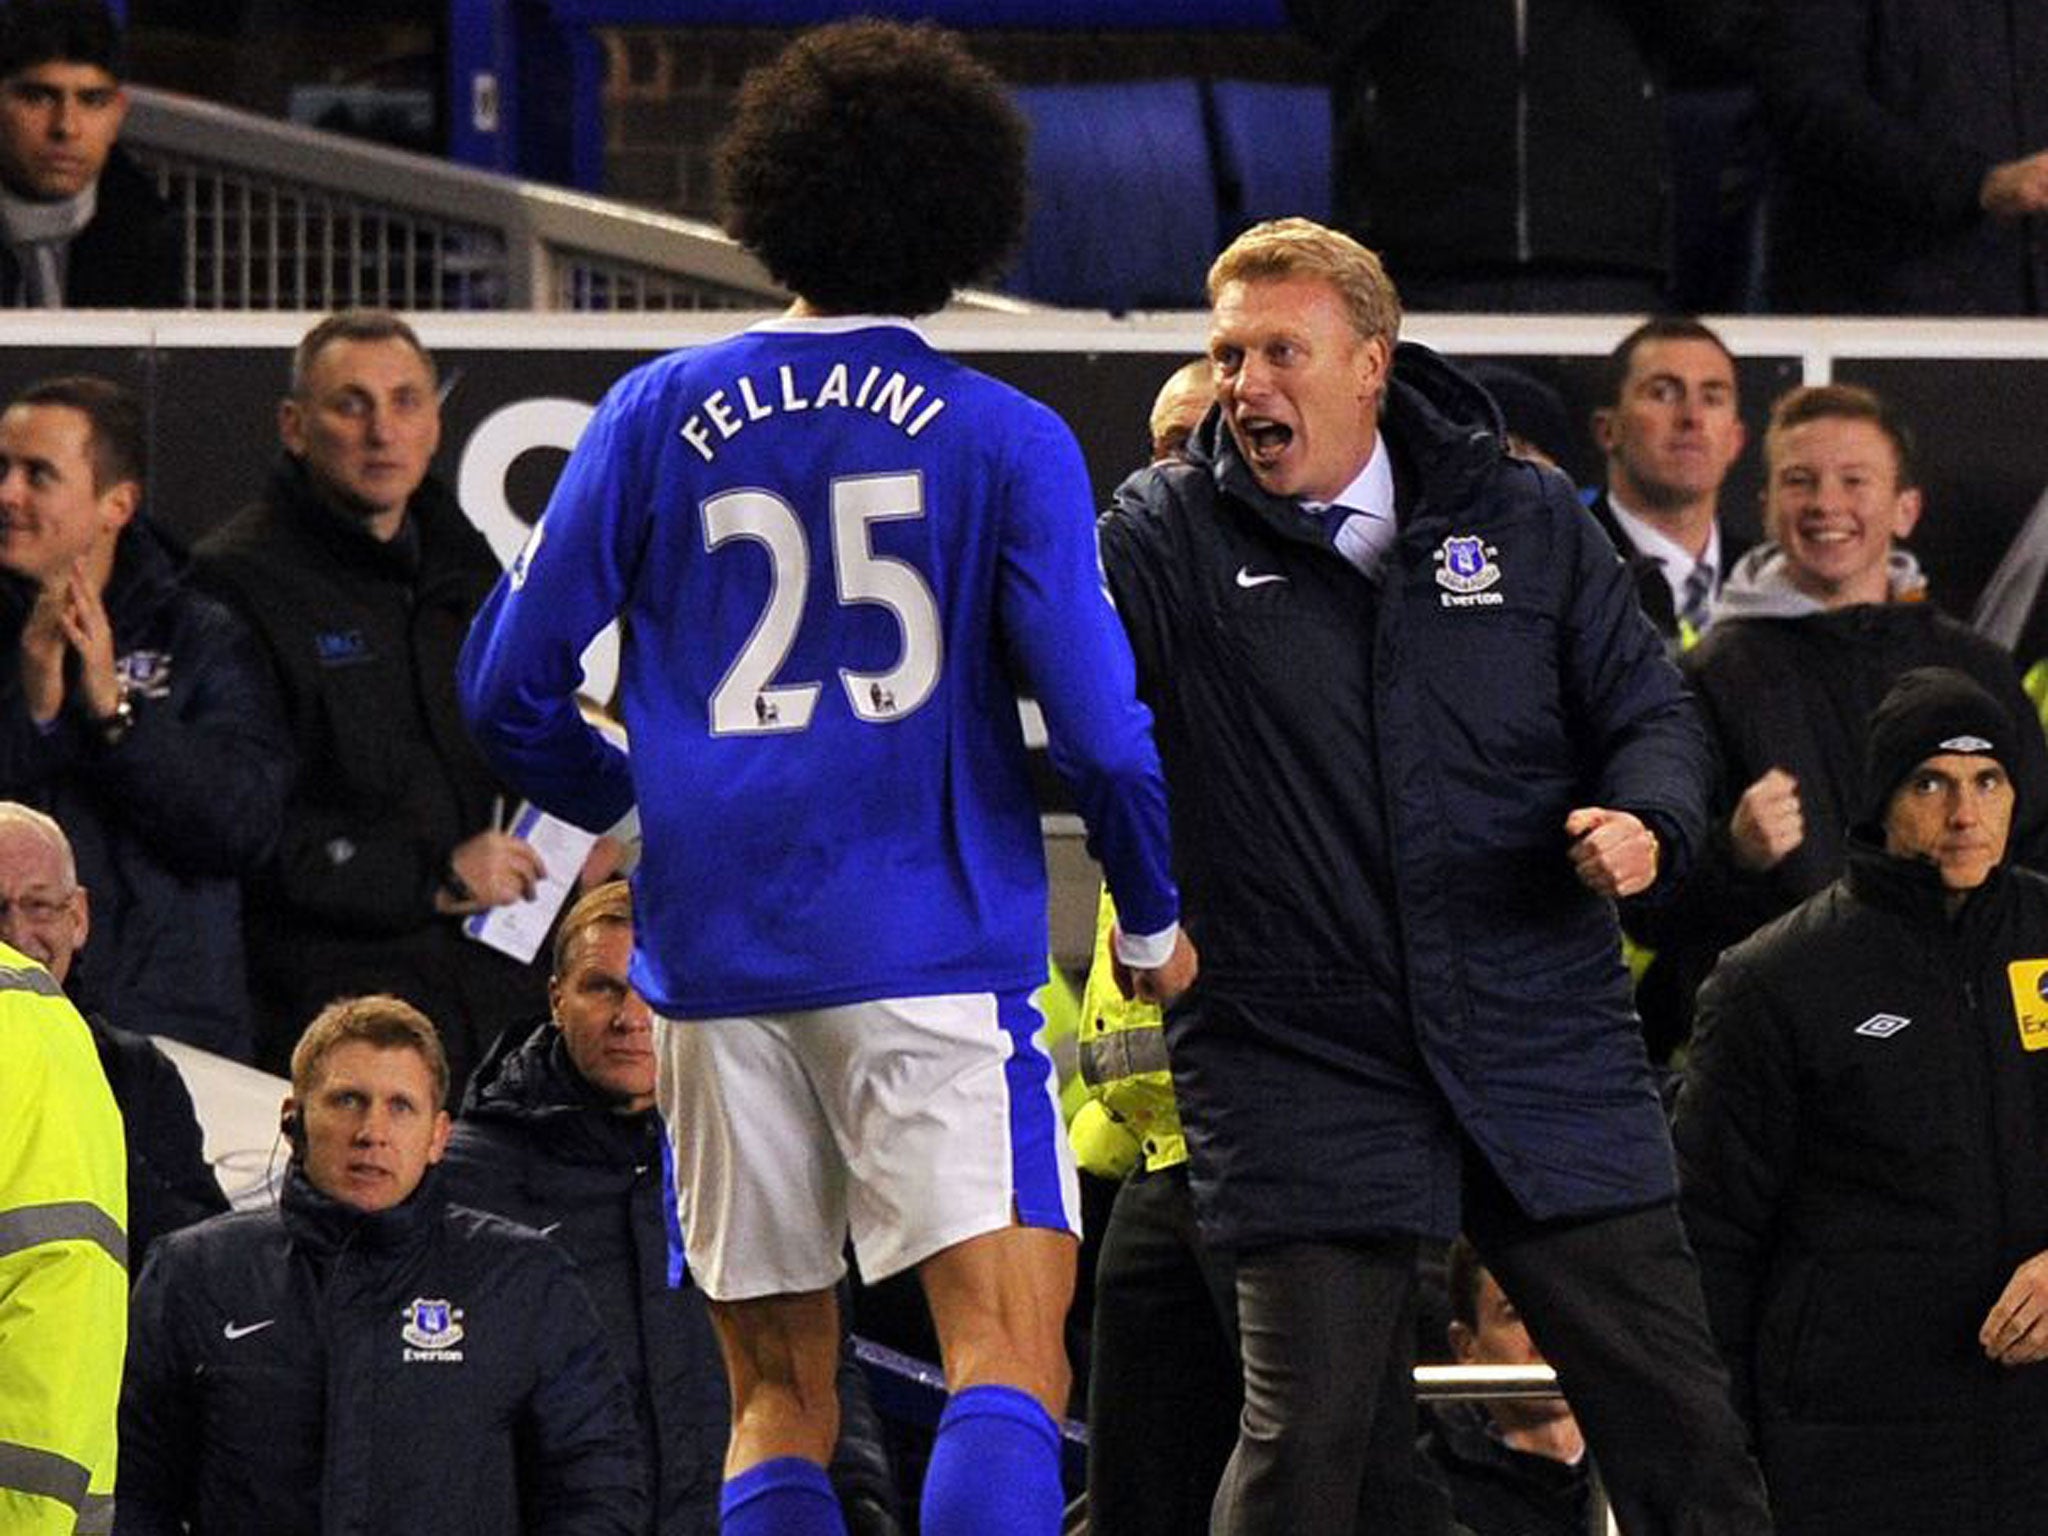 David Moyes is now at Manchetser United and hopes Marouane Fellaini will soon be joining him there